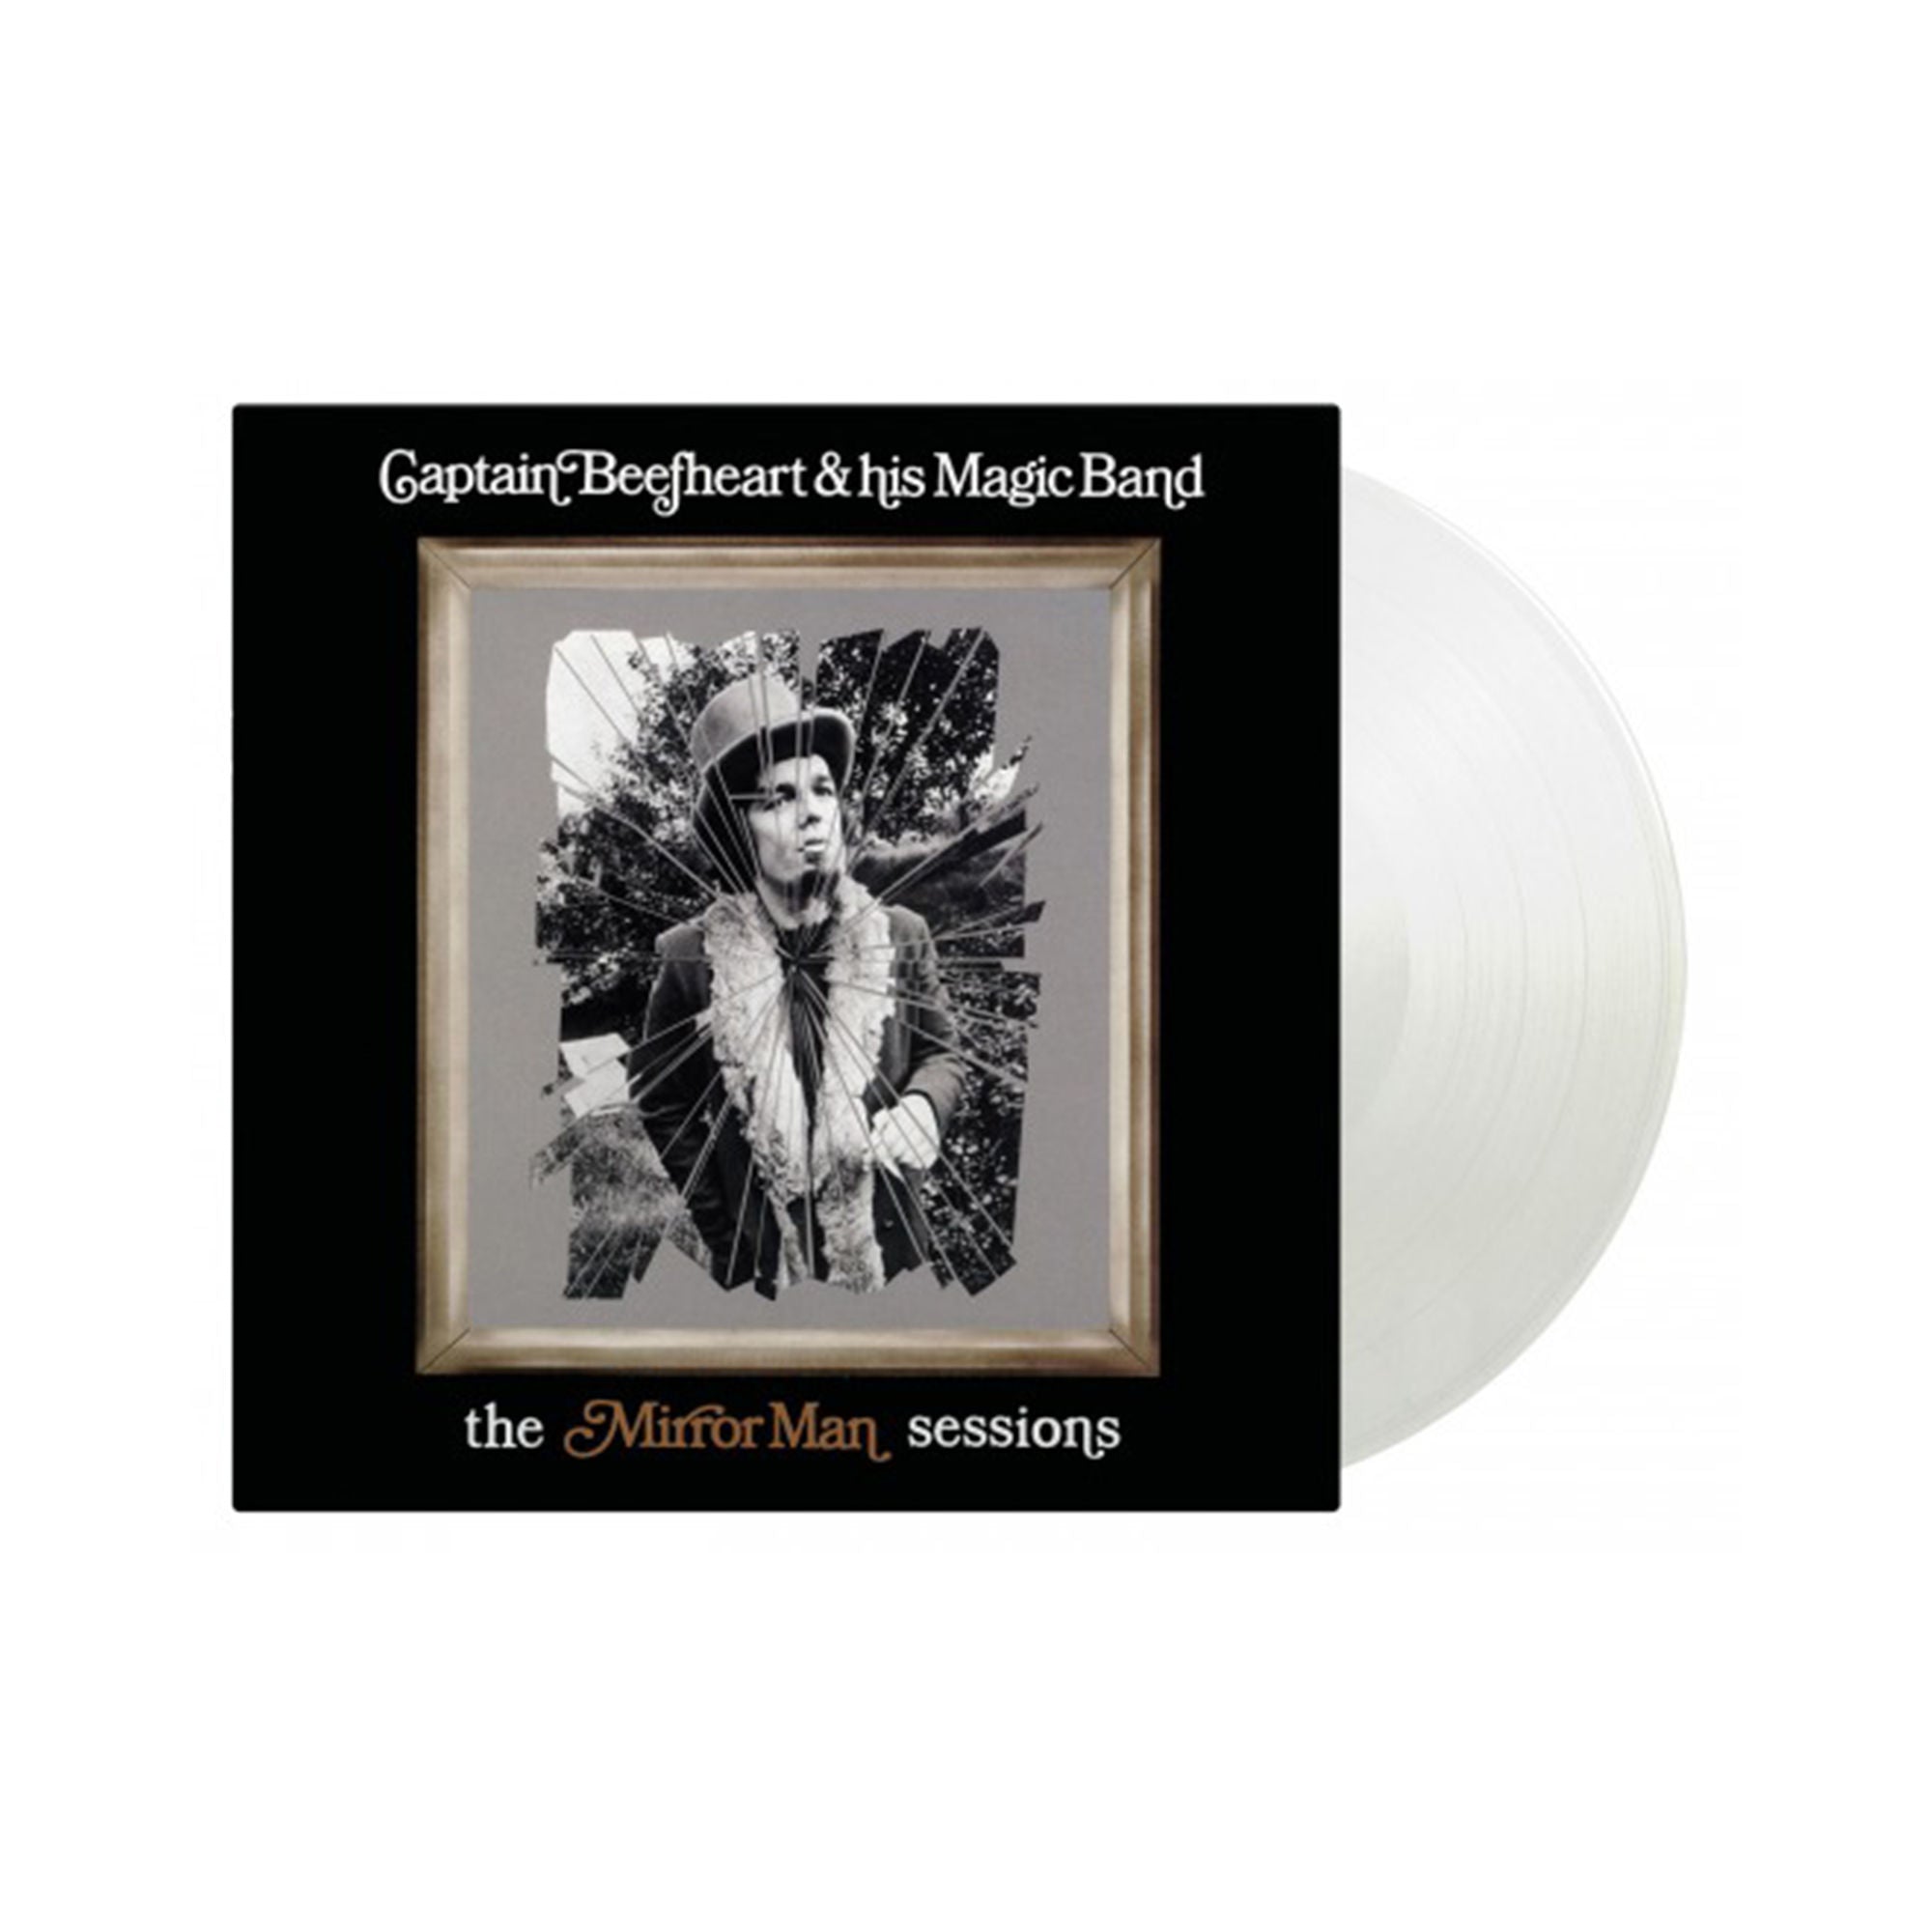 The Mirror Man Sessions: Limited Crystal Clear Vinyl 2LP